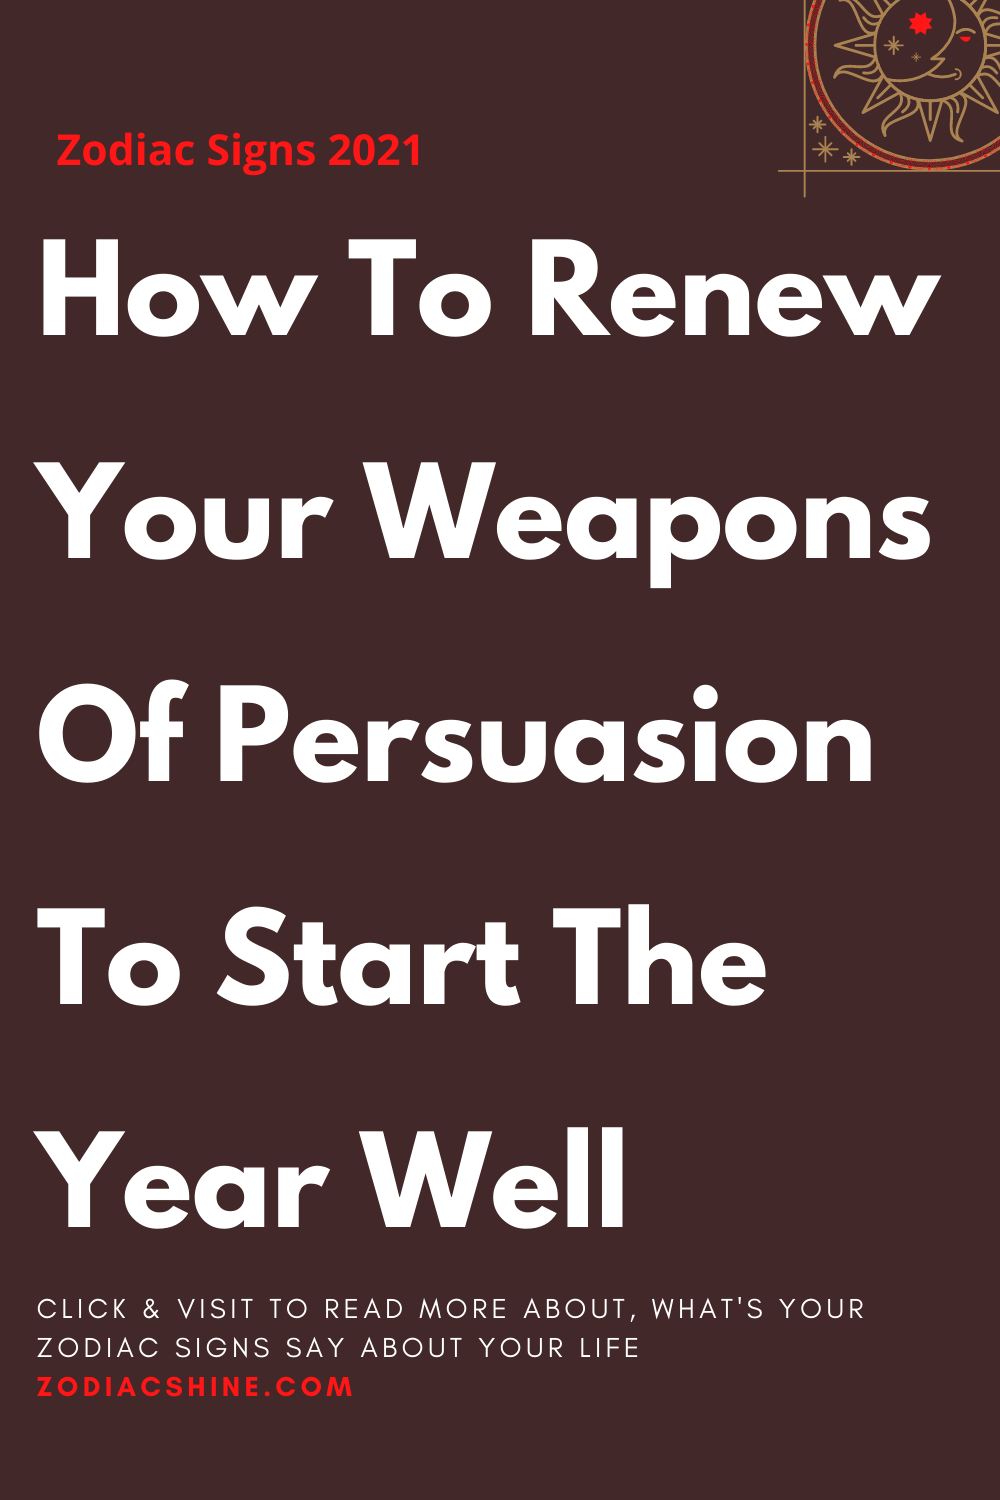 How To Renew Your Weapons Of Persuasion To Start The Year Well